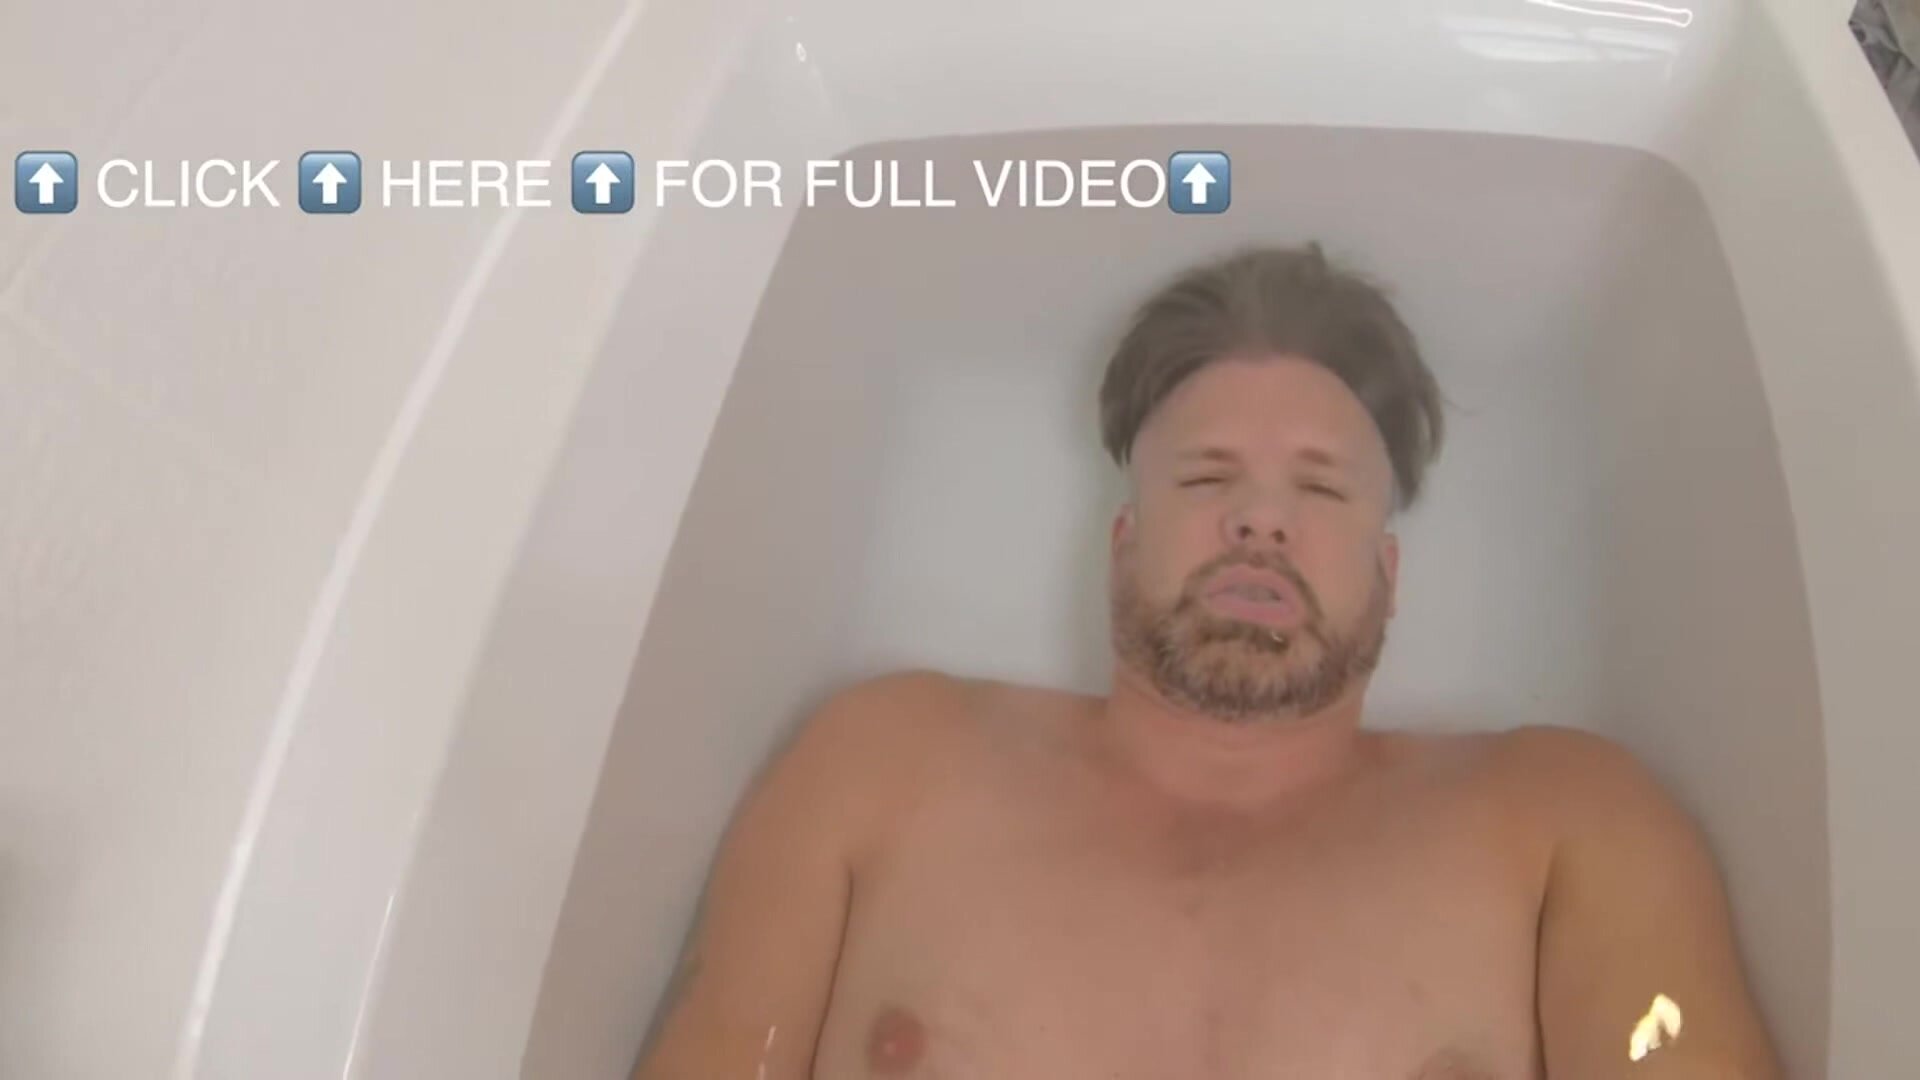 Sexy guy barefaced underwater in tub